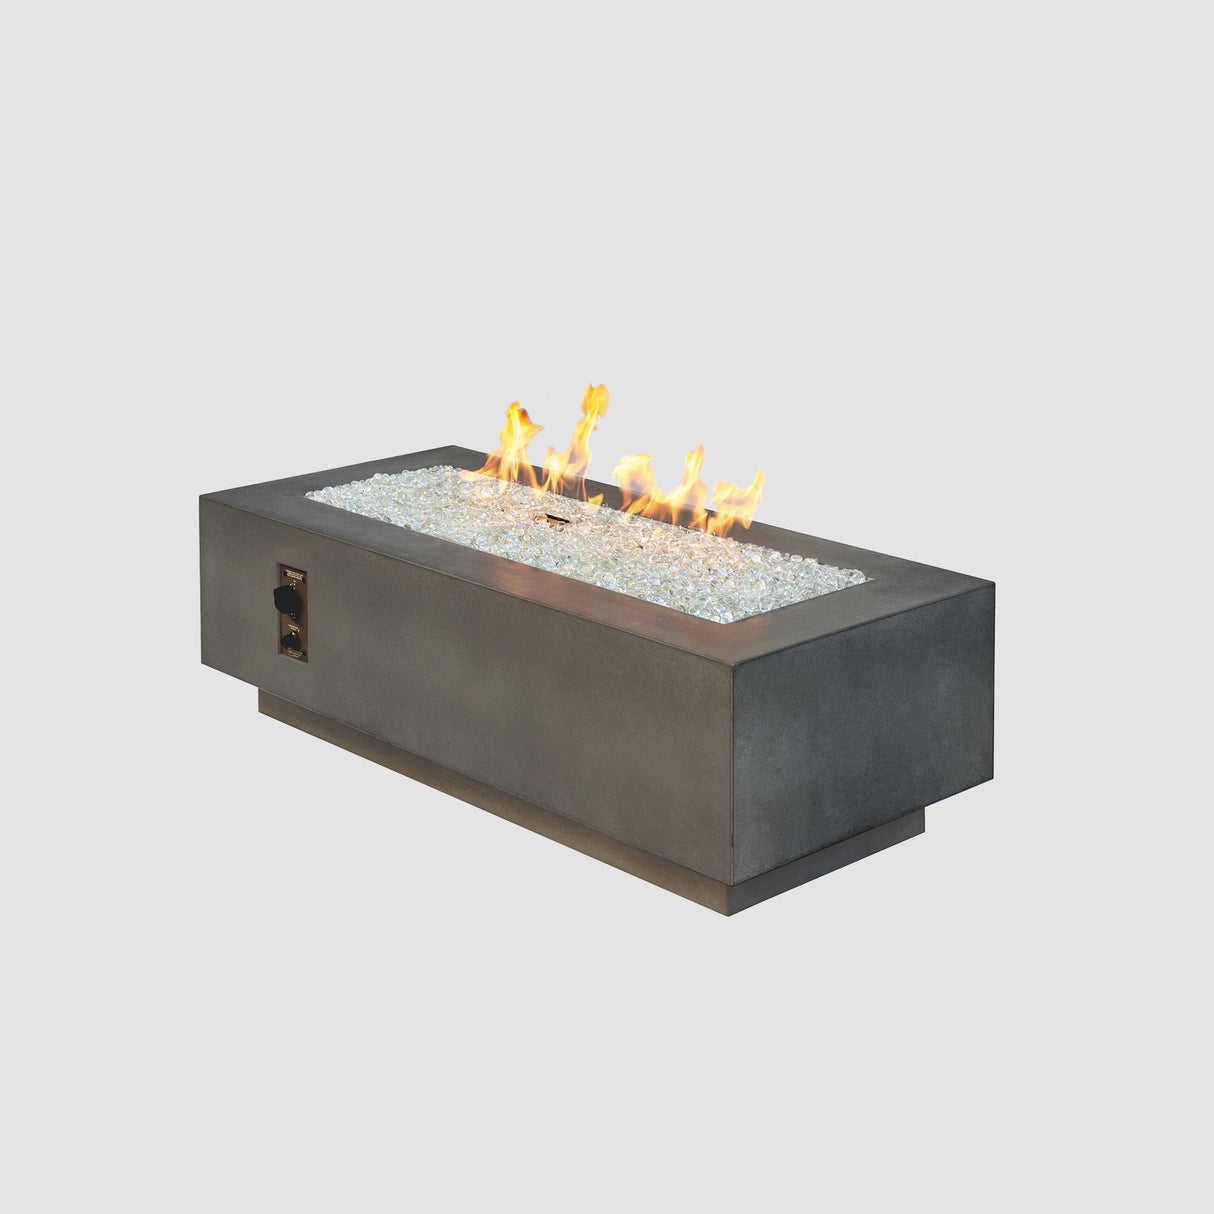 A Midnight Mist Cove Linear Gas Fire Pit Table 54" surrounded by a white background